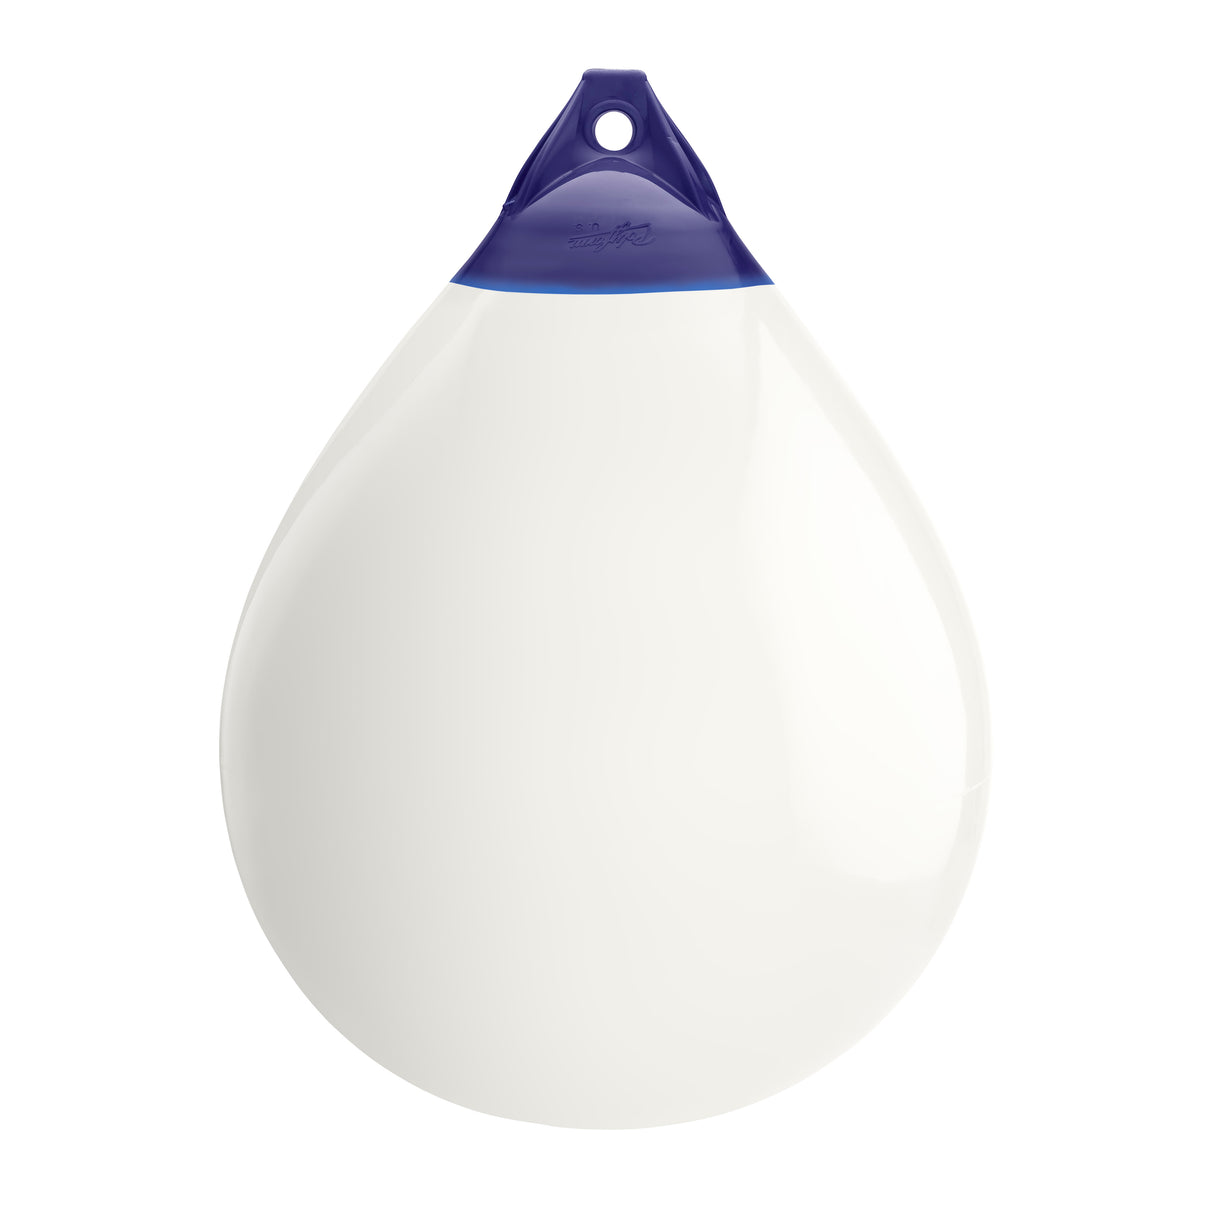 White inflatable buoy, Polyform A-7 